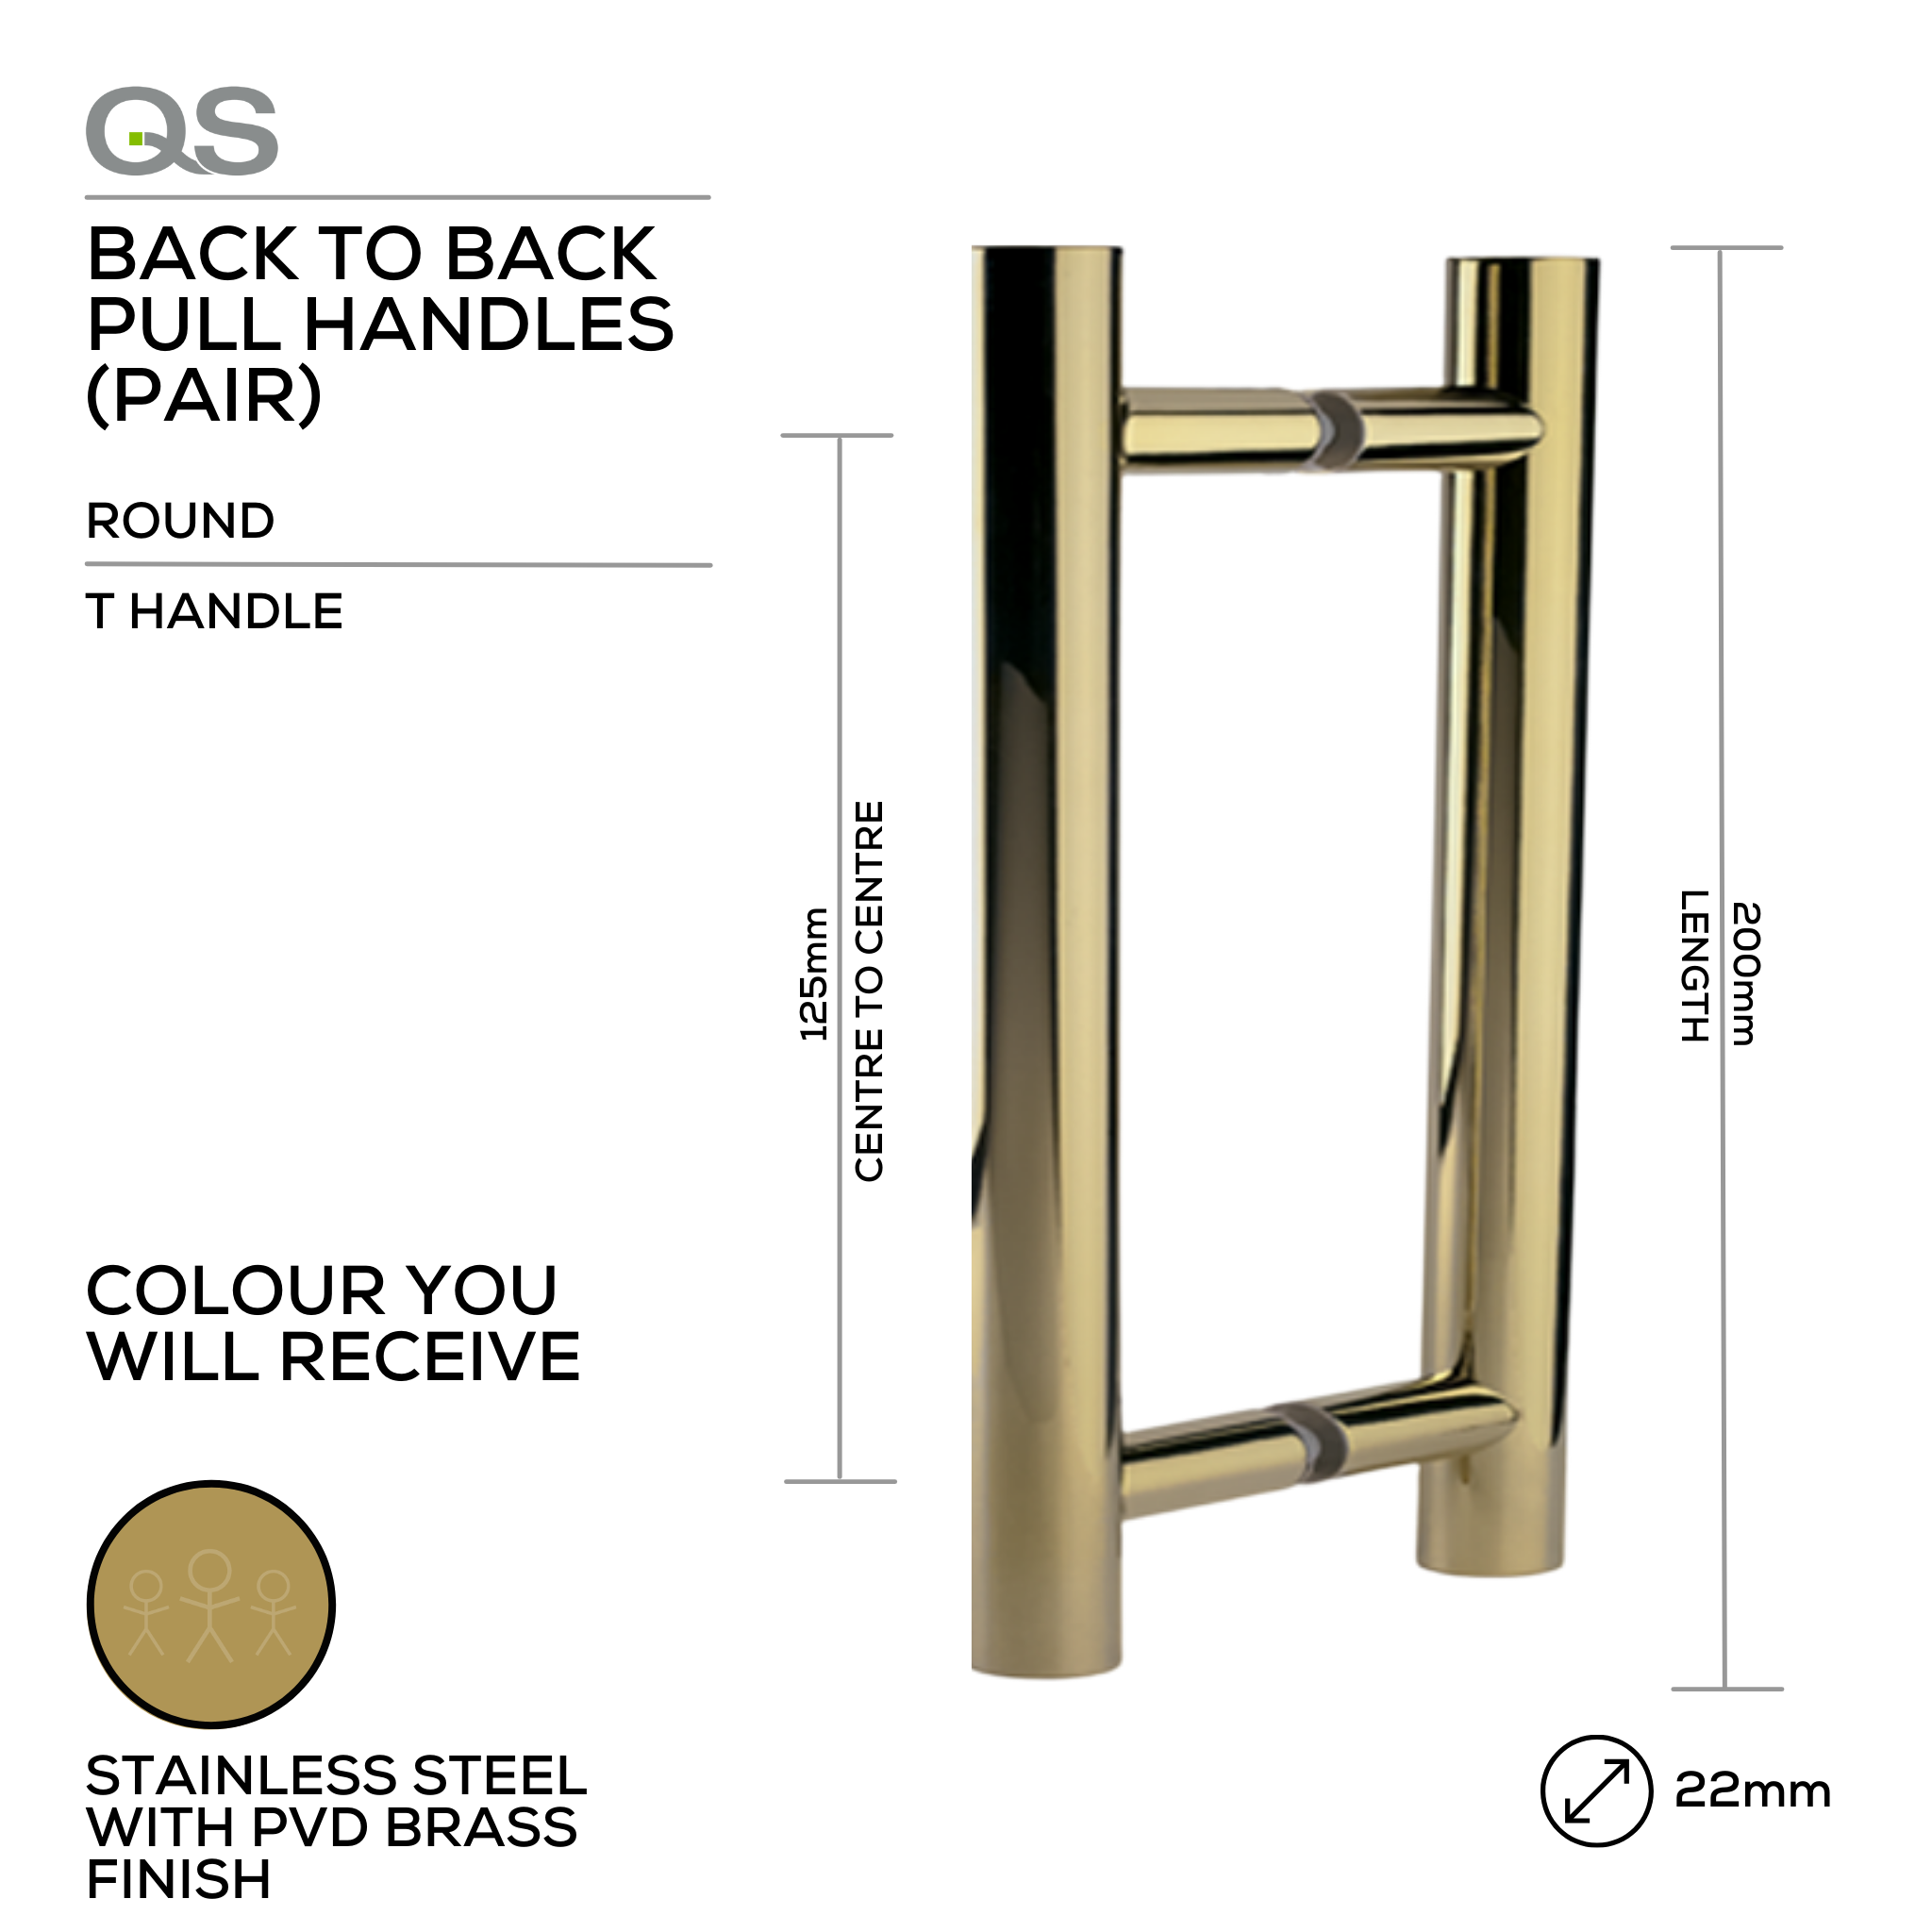 QS2503 PVD T Handle, Pull Handle, Round, T Handle, BTB, 22mm (Ø) x 200mm (l) x 125mm (ctc), Stainless Steel with PVD Brass Finish, QS